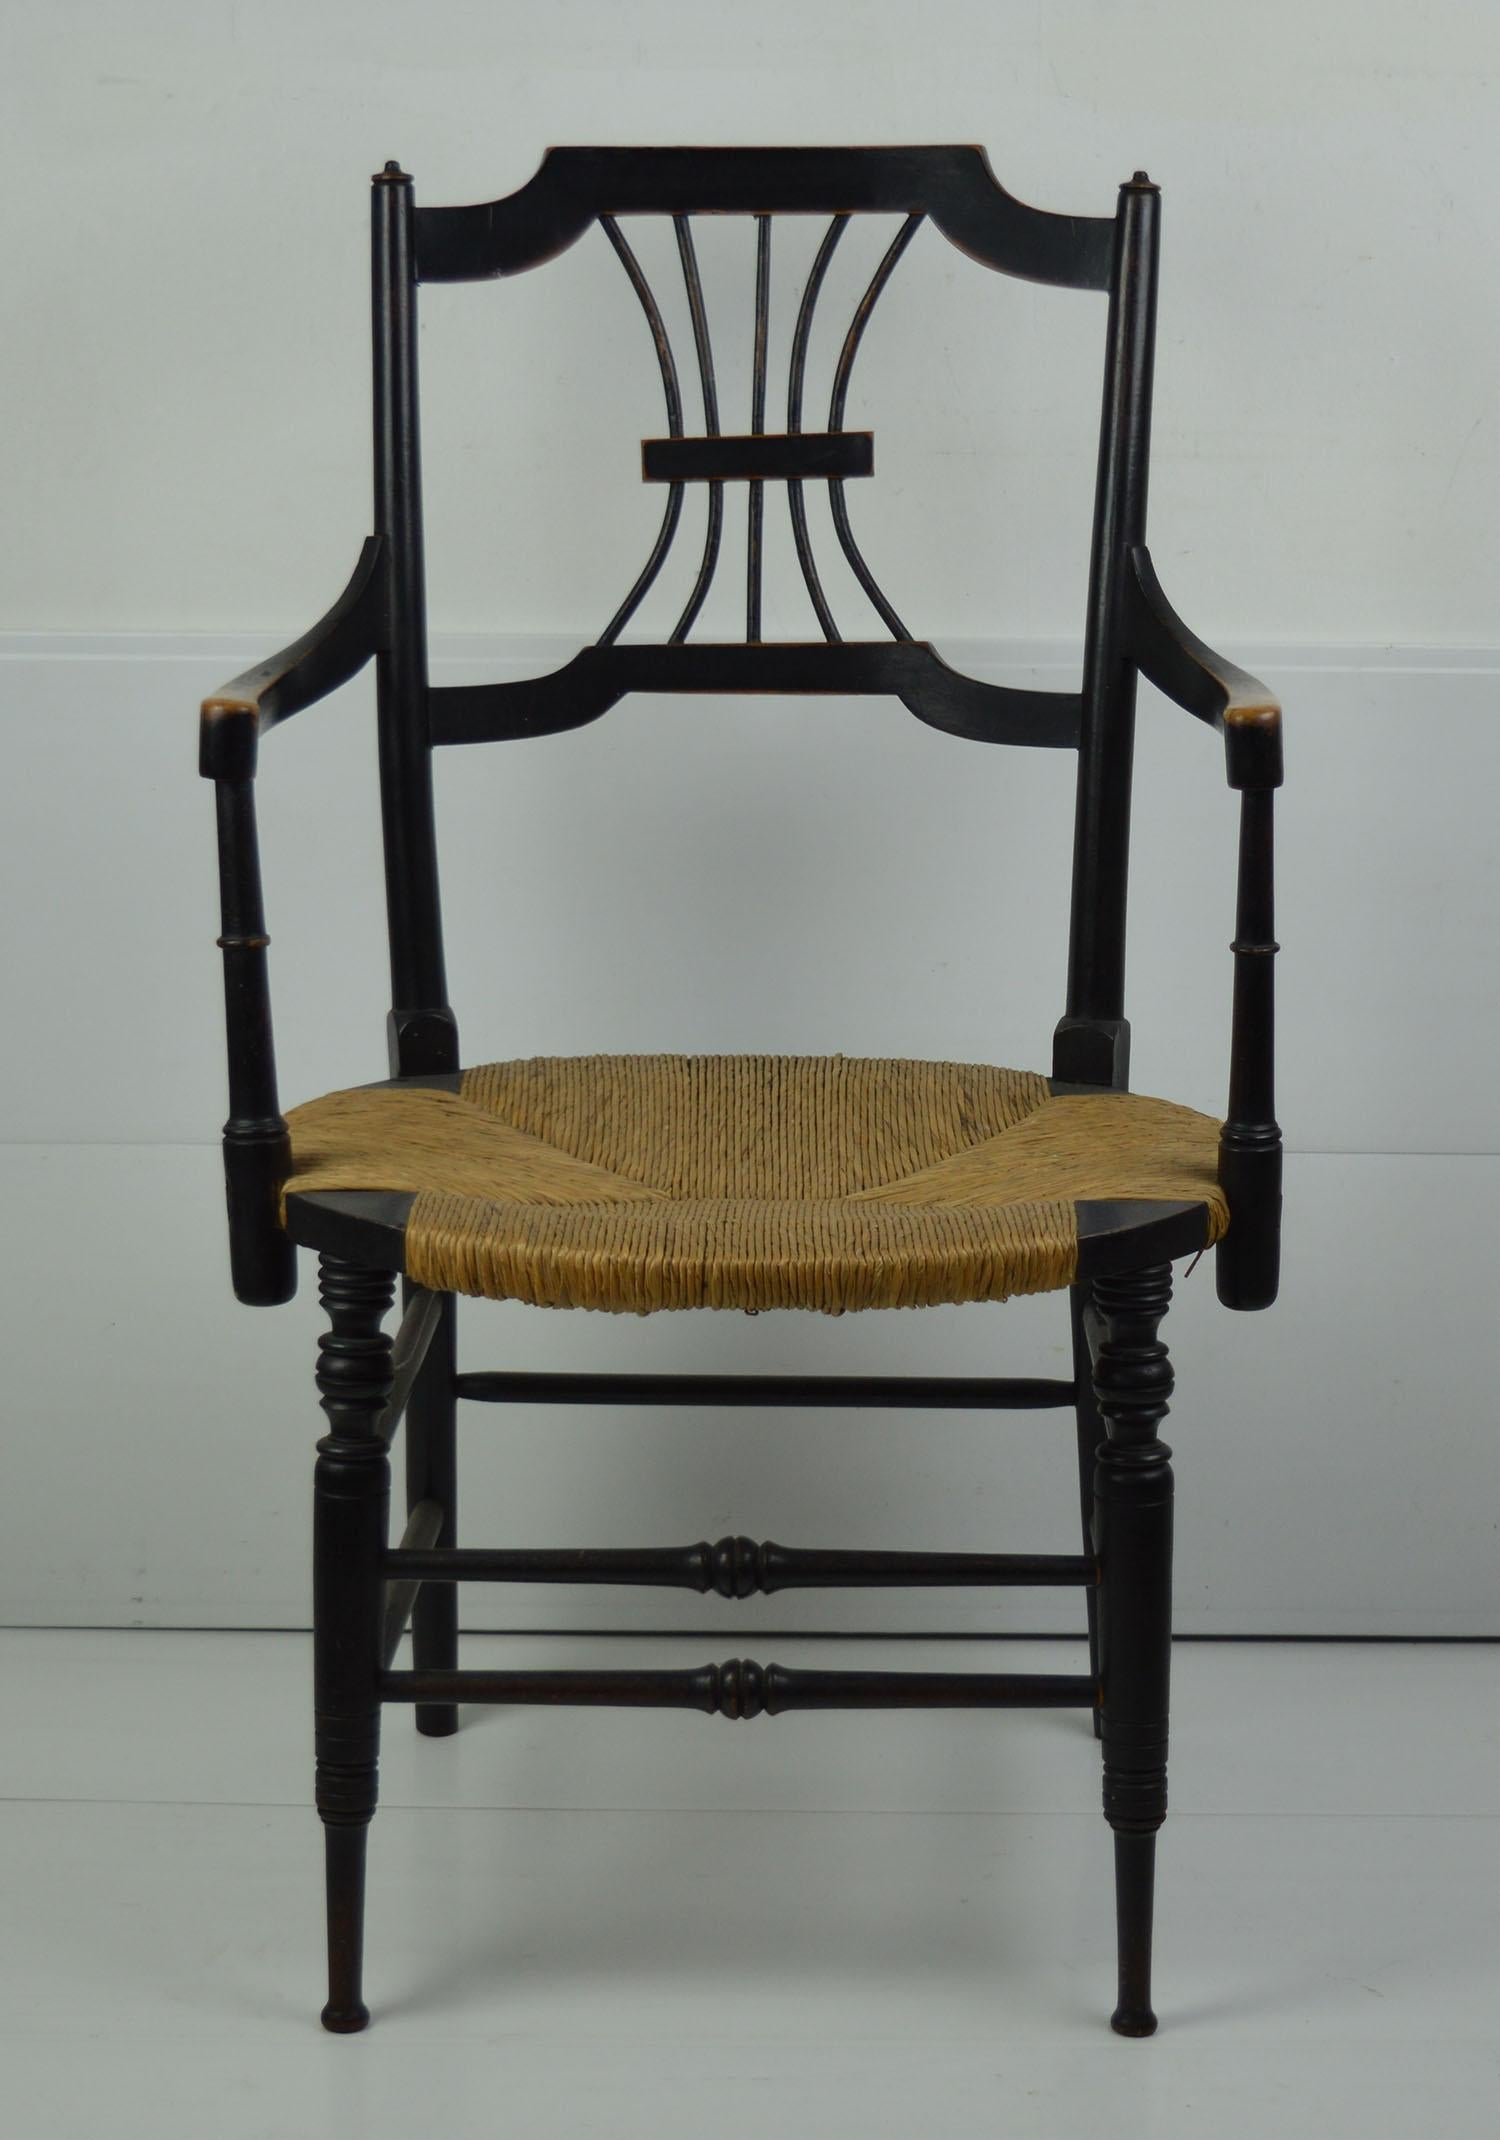 Fabulous example of a so called Sussex chair made and retailed by William Morris

Designed by Dante Gabriel Rossetti

Ebonised beech

In very good condition.

The rushing is probably original. If it isn't it has been done very well.

   